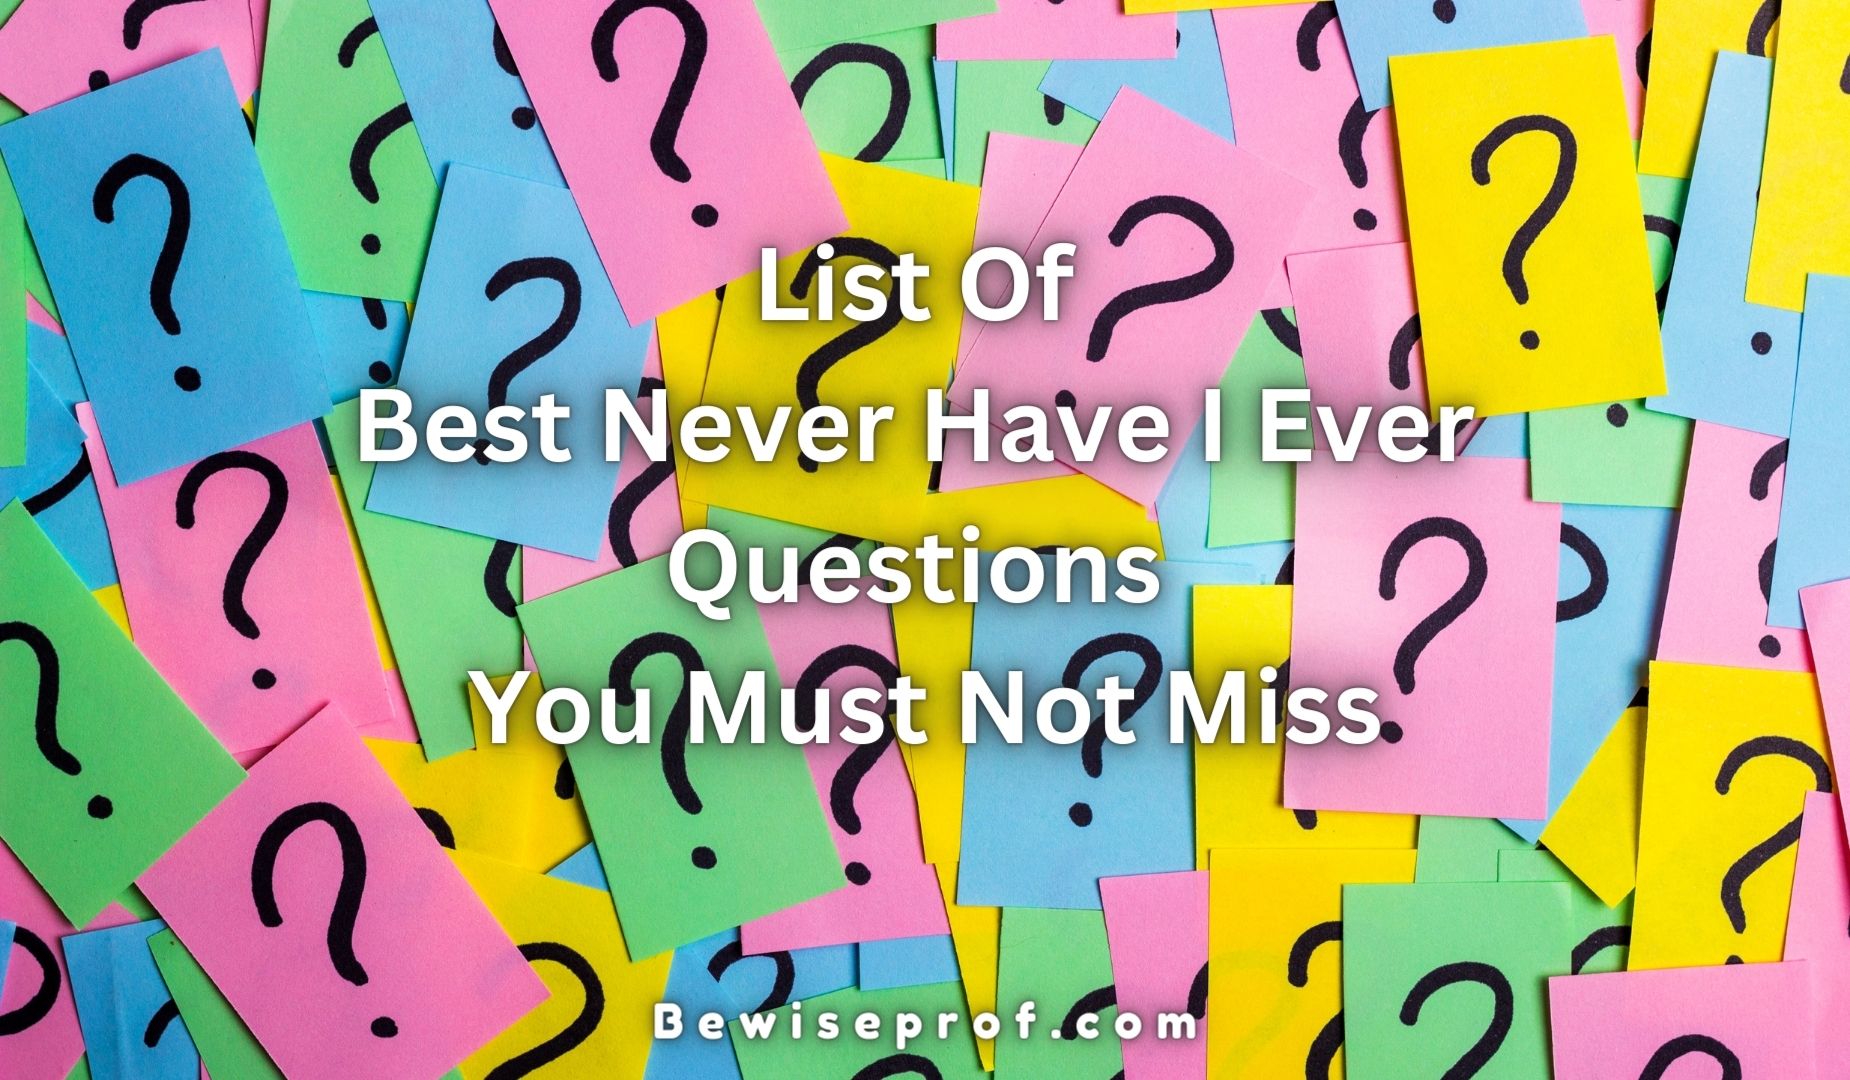 List Of Best Never Have I Ever Questions You Must Not Miss